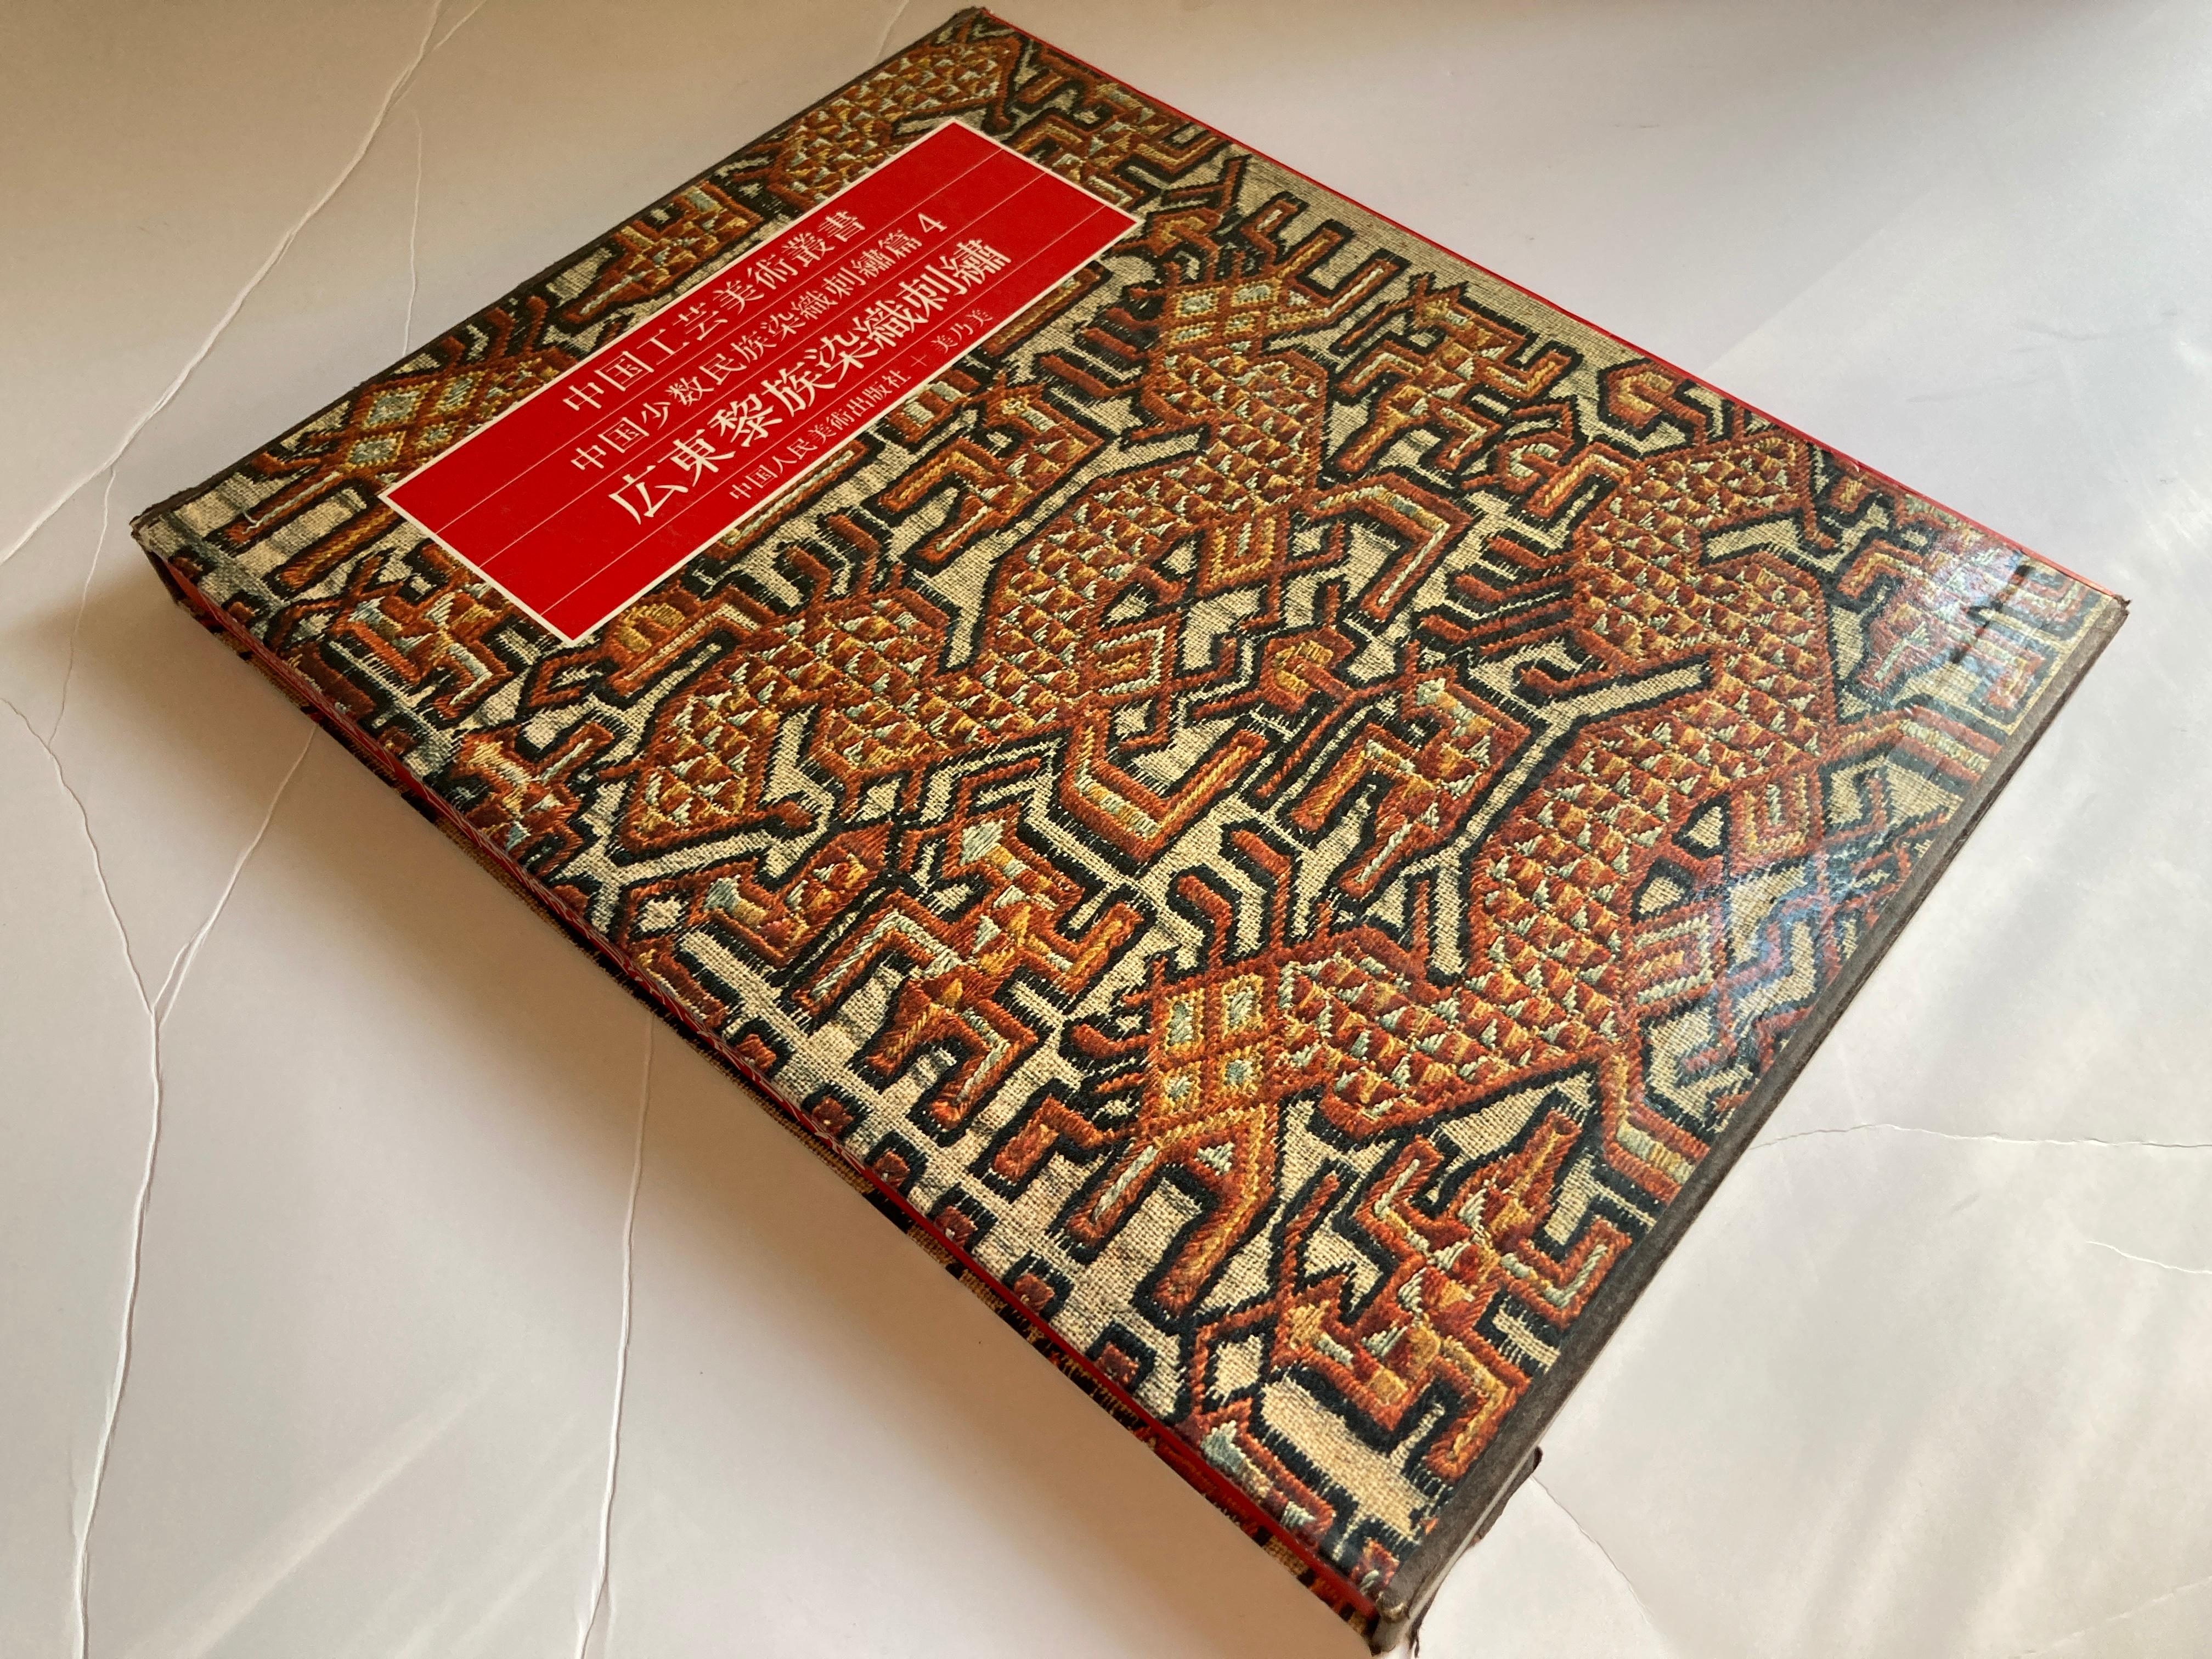 Chinese antique textiles and embroidery.
Chinese language,
Great textile art table book.
Distributed by Eliane j Giraud Dupont Editeur, Paris.
Collector Table book.